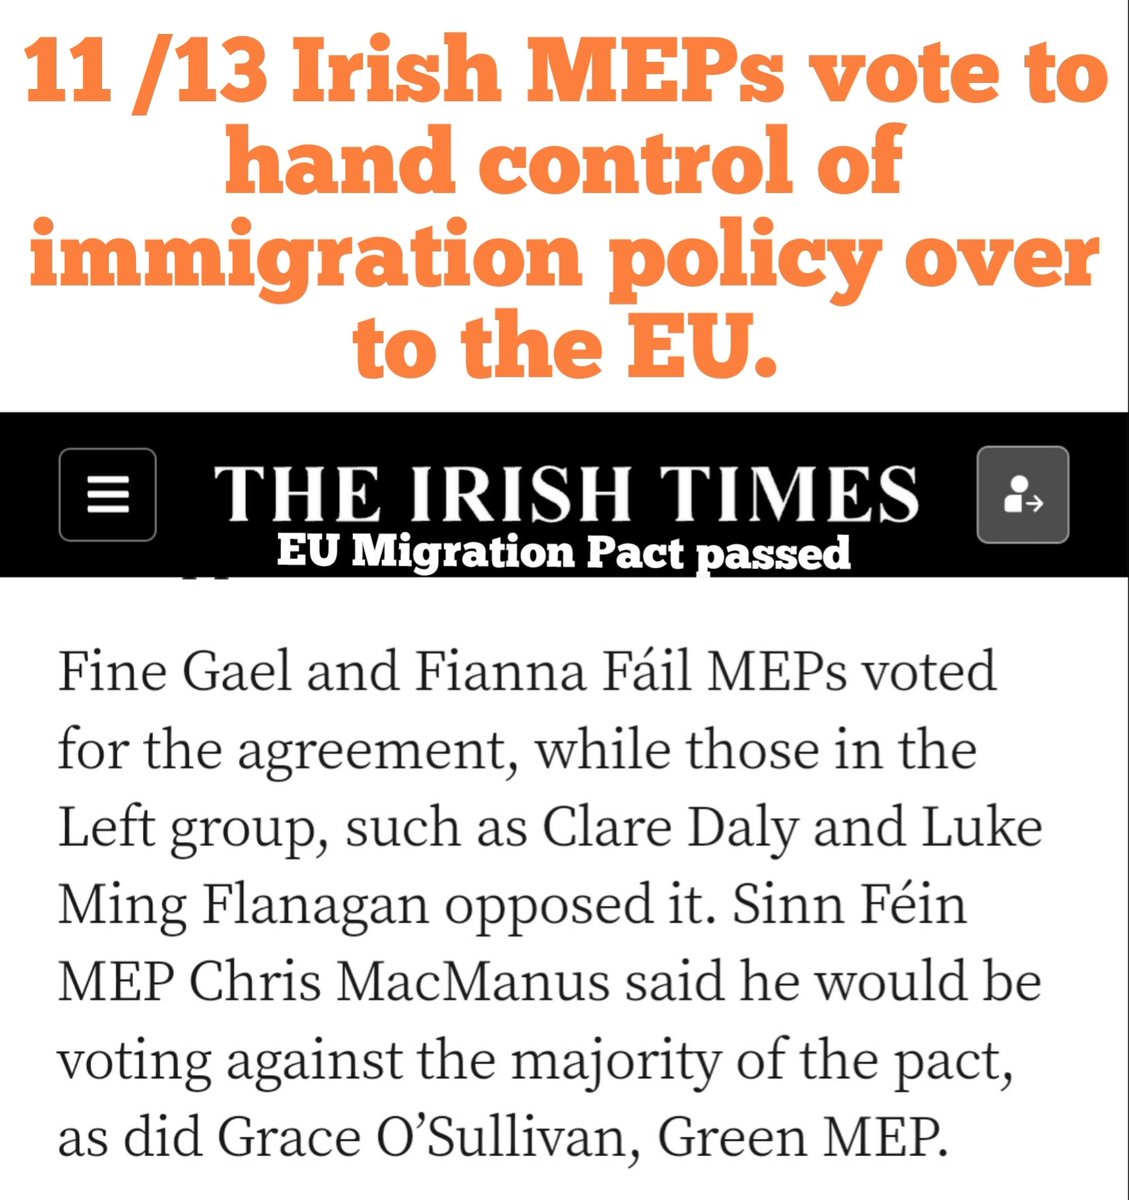 Irish MEPs in Brussels are lapdogs of EU Policy. @FineGael @FiannaFail #LukeMing always ready to let you down. #EUMigrationPact #IrelandOptsOut